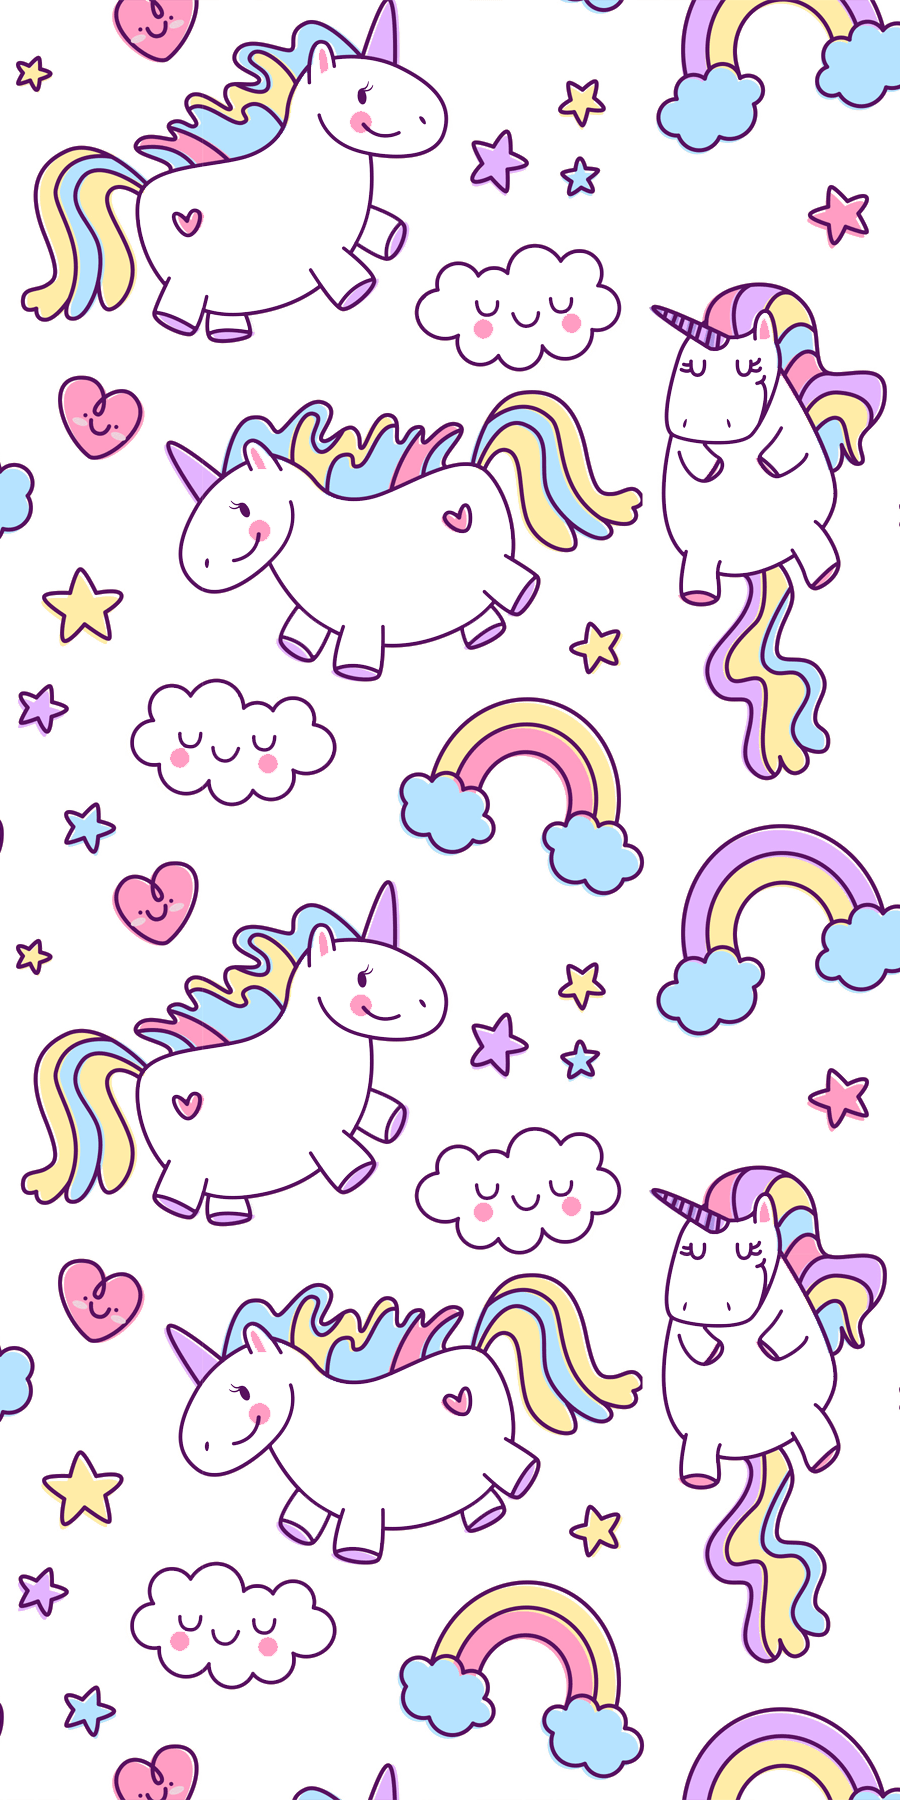 A wallpaper with unicorns, clouds, hearts, and rainbows. - Unicorn